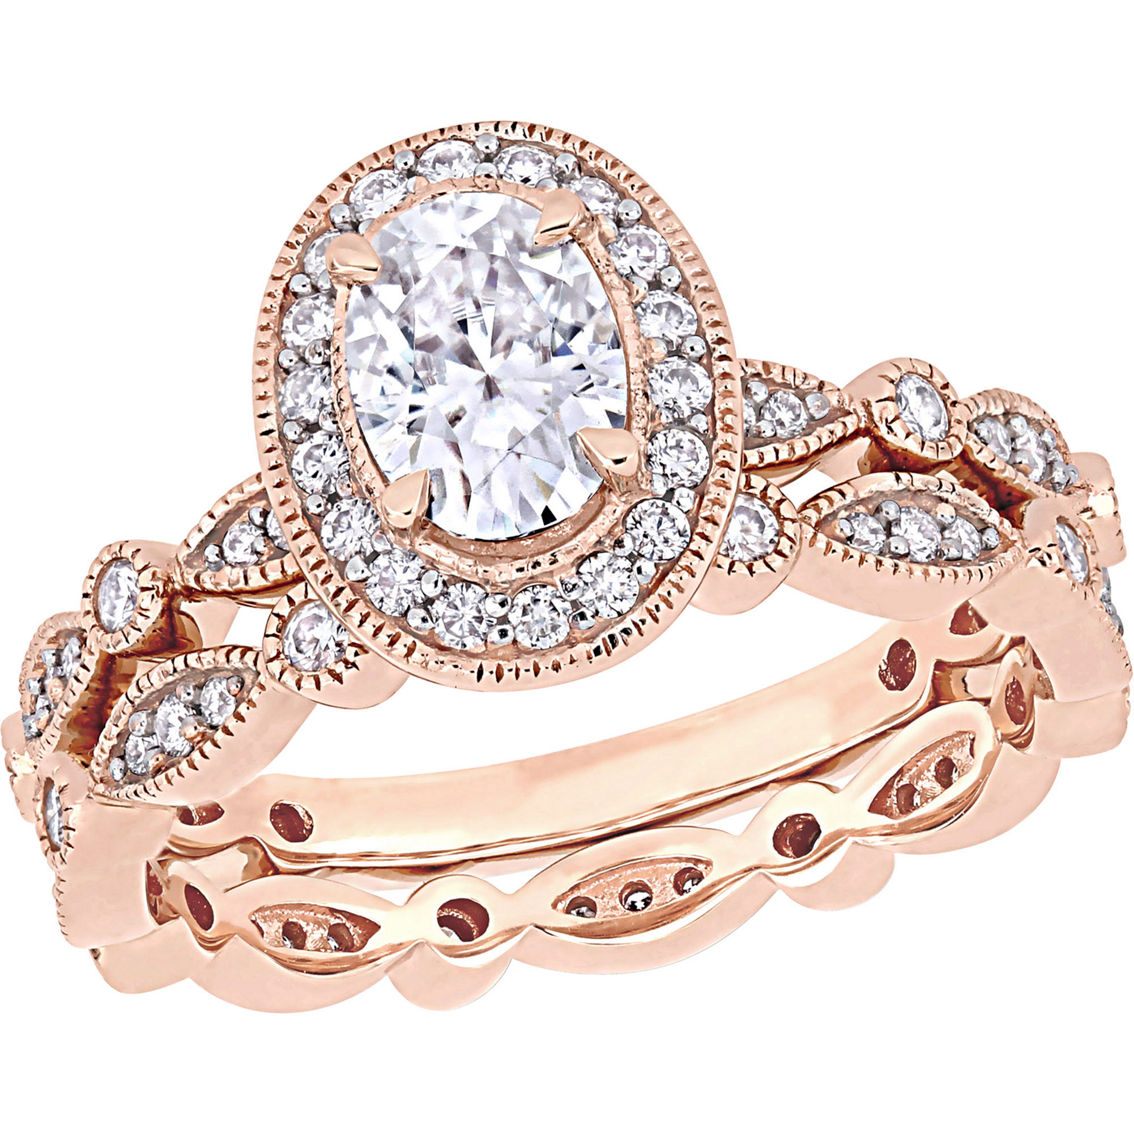 Sofia B. 10K Rose Gold 1 1/2 CTW Moissanite Oval Halo Infinity Engagement Ring